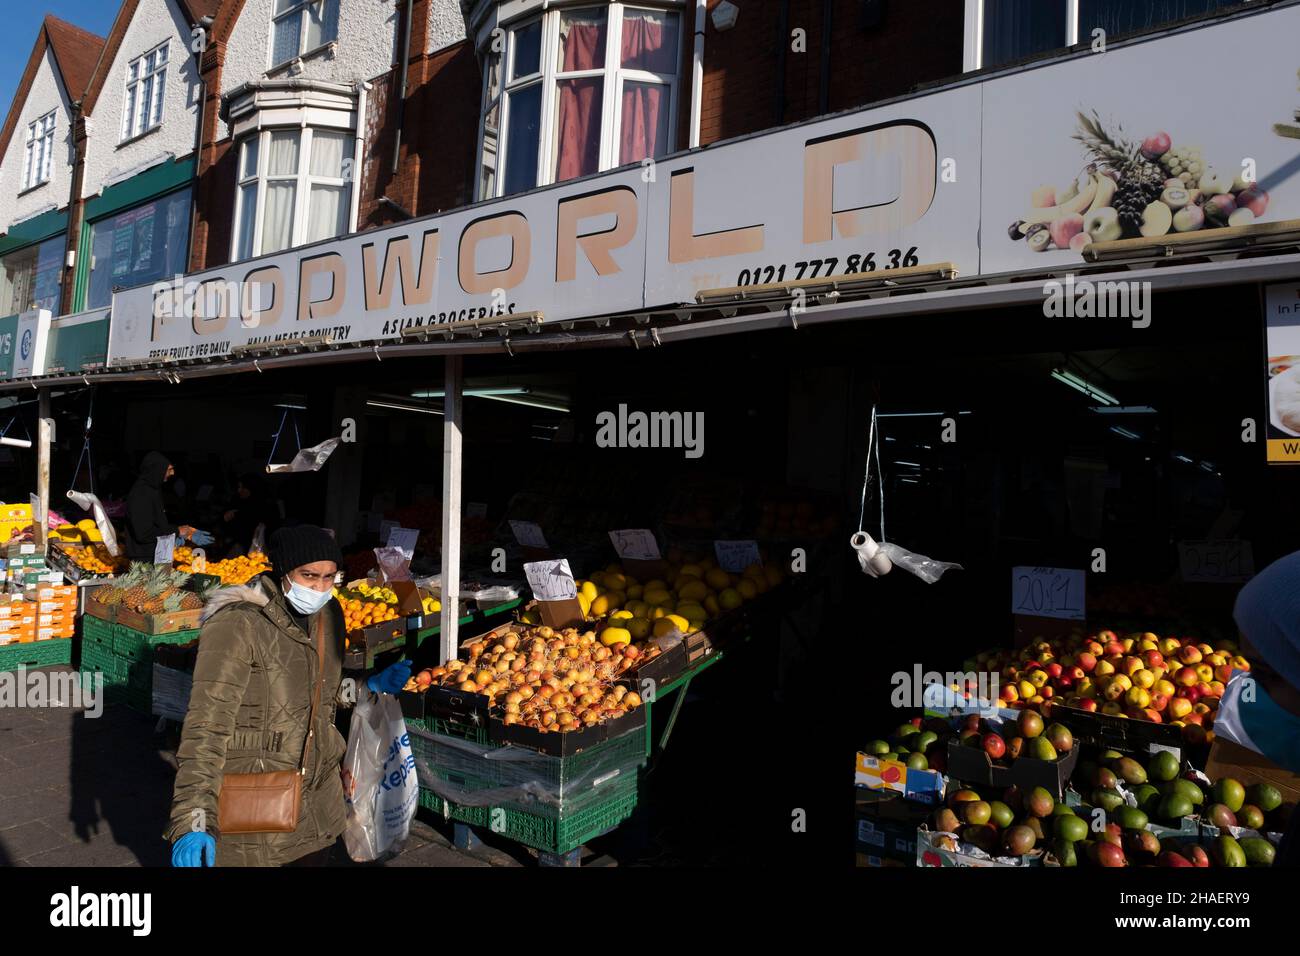 Foodworld shop along the Stratford Road in Sparkhill, an inner-city area of Birmingham situated between Springfield, Hall Green and Sparkbrook on 25th November 2021 in Birmingham, United Kingdom. The Sparkhill has become heavily influenced by migrants who settled here over many decades. It has a large population of ethnic minorities, mainly of South Asian origin, which is reflected by the number of Asian eateries in the area. As a result, Sparkhill has become a main centre in the Balti Triangle of Birmingham. Stock Photo